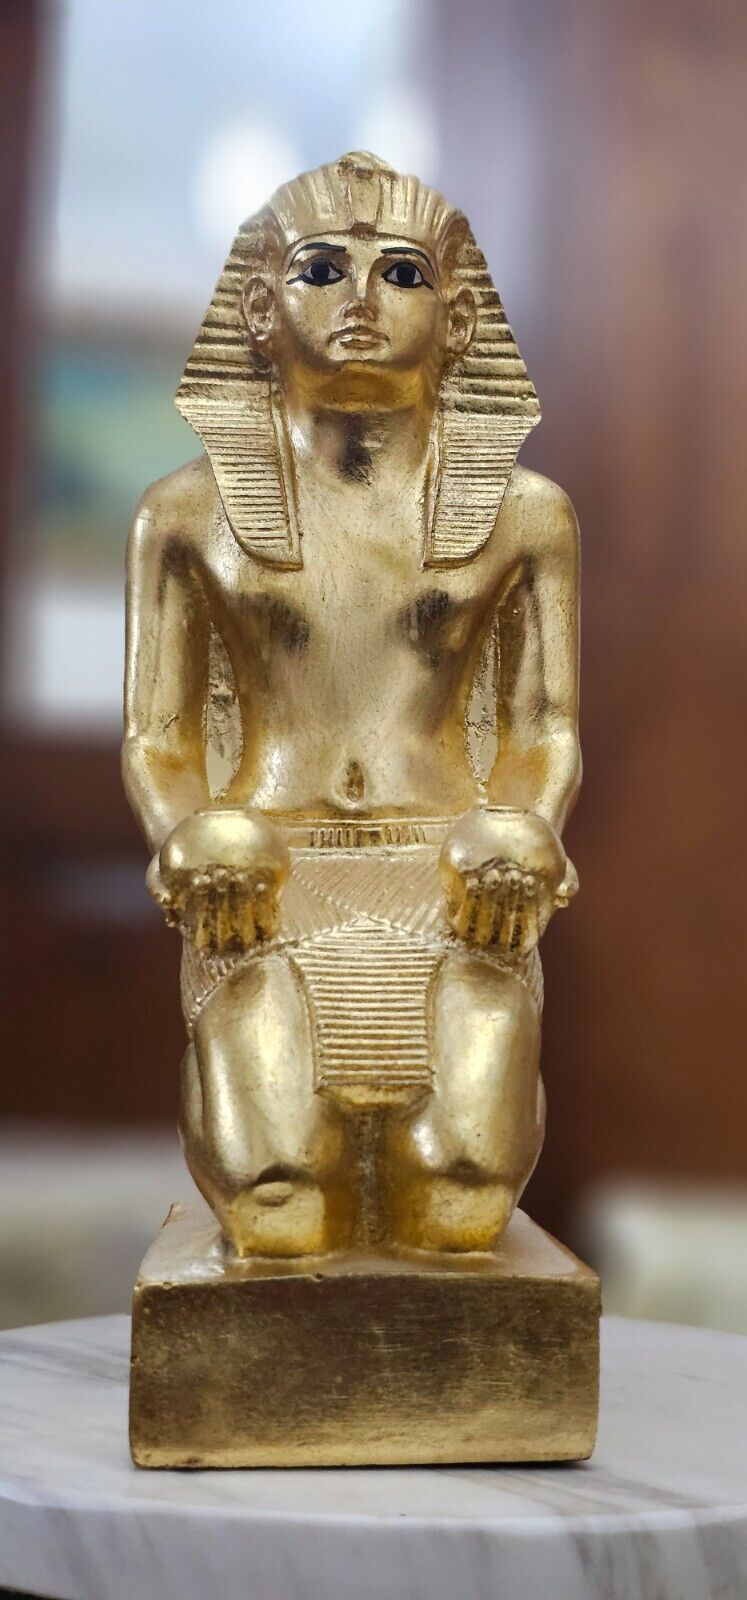 King Thutmose Statue from Ancient Egypt , Egyptian Art Sculpture